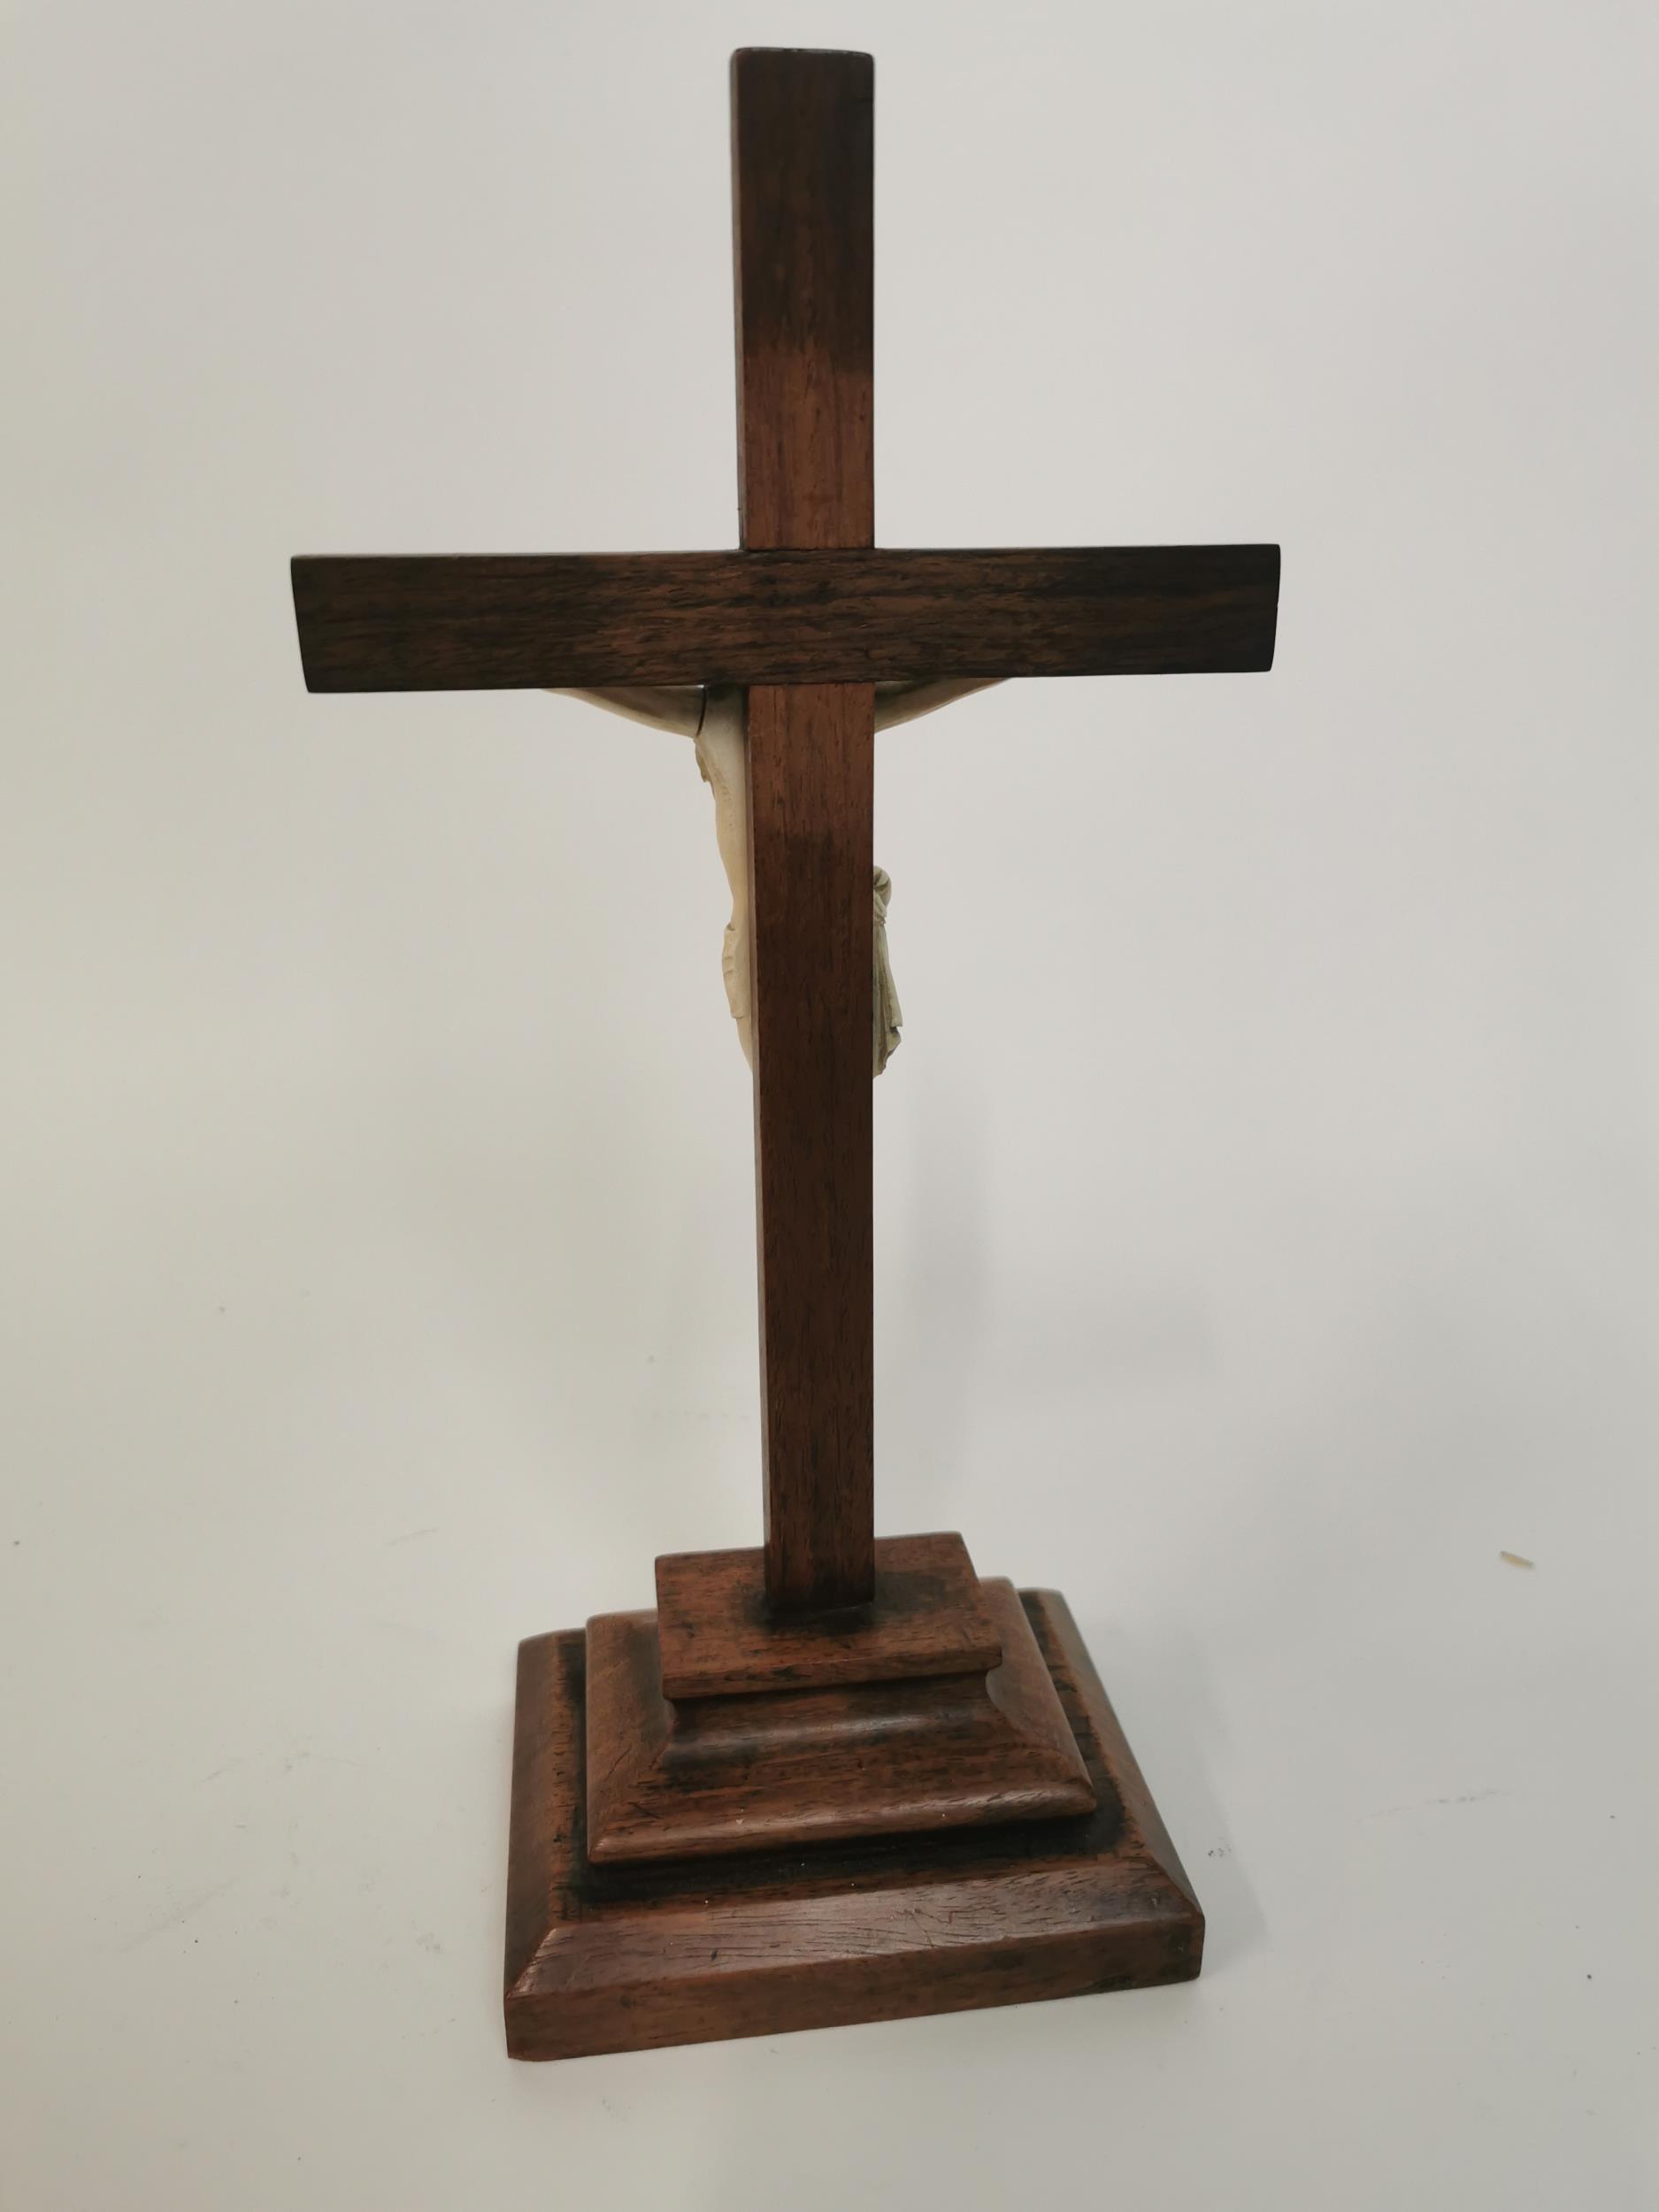 Carved oak and Ivory Crucifix. {34 cm H x 17 cm W x 11 cm D}. - Image 5 of 6